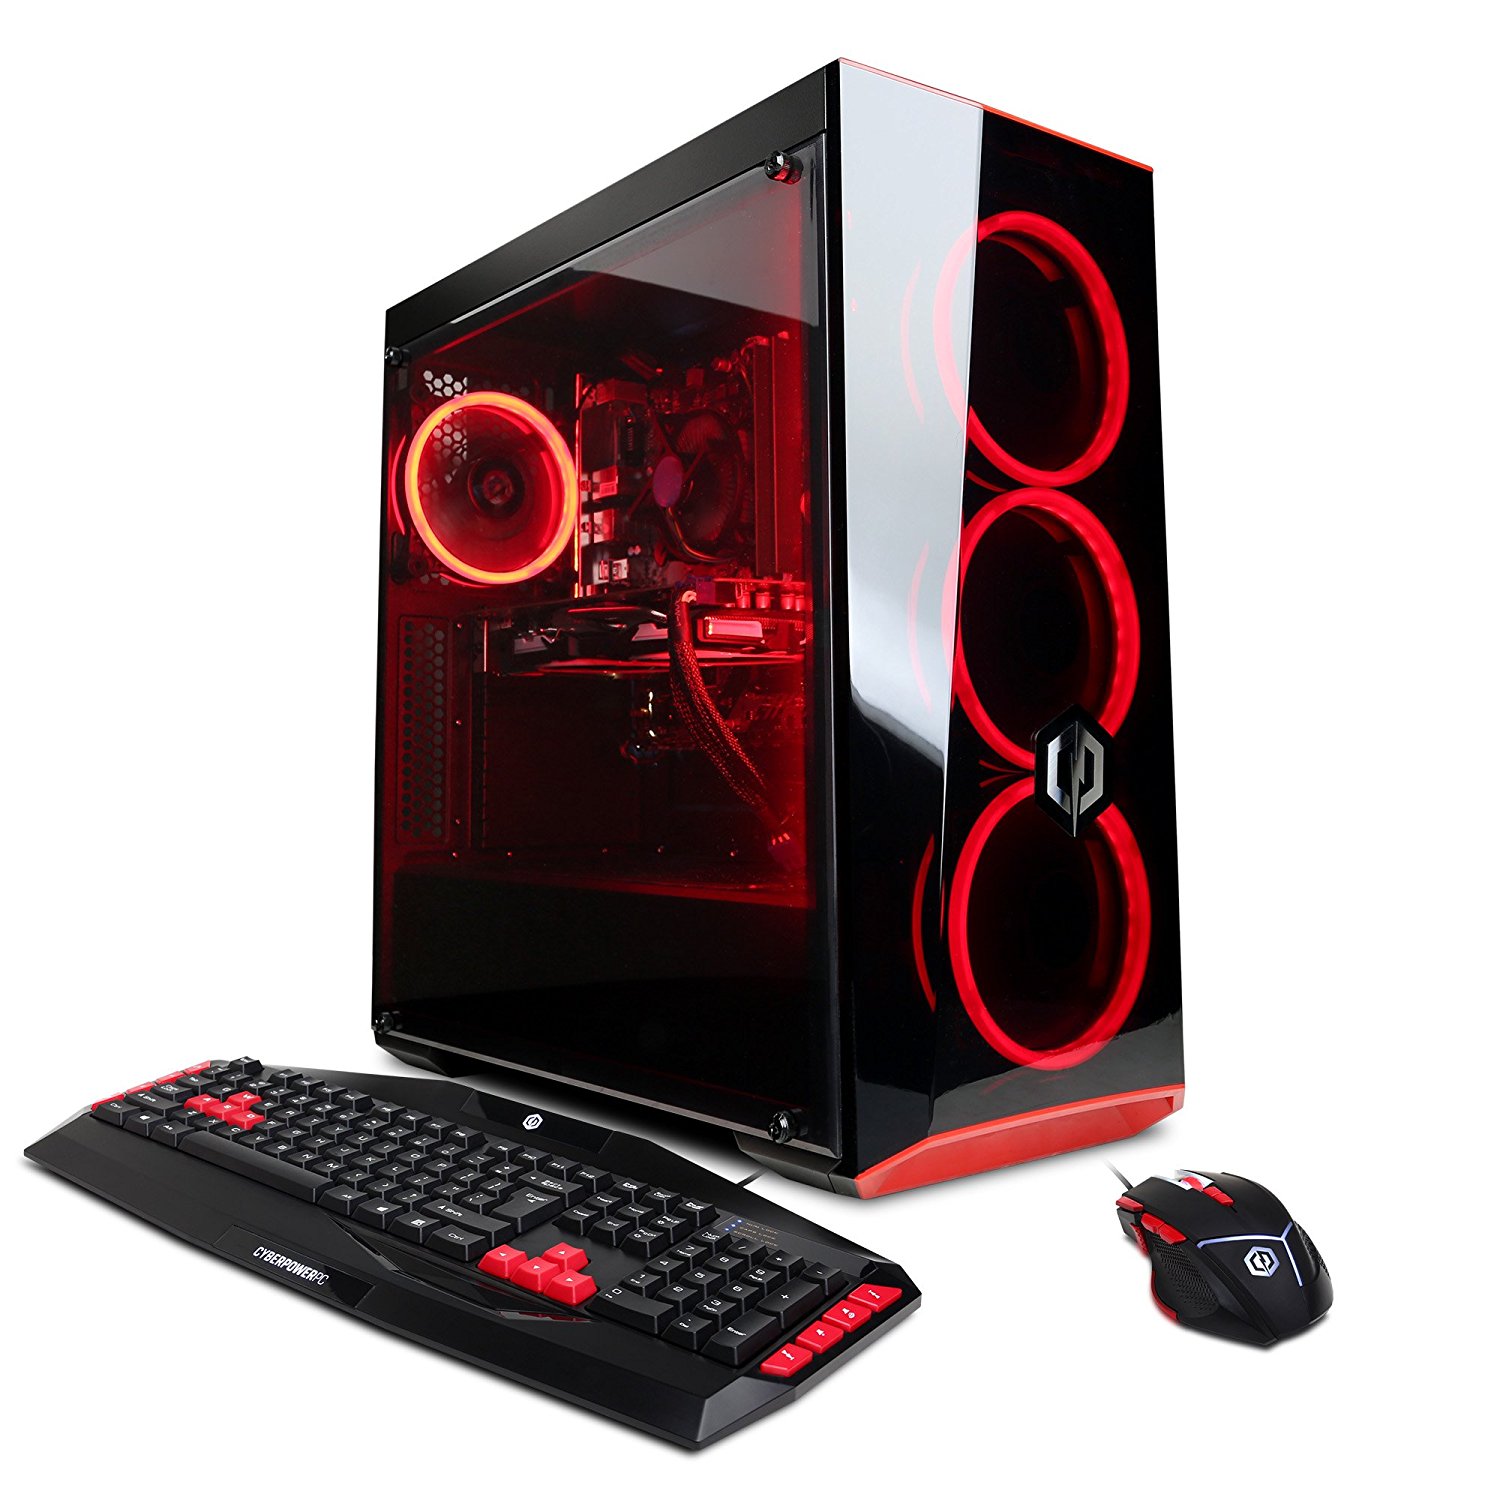 Simple Cyberpowerpc Gamer Xtreme Vr Best Budget Gaming Desktop with Wall Mounted Monitor